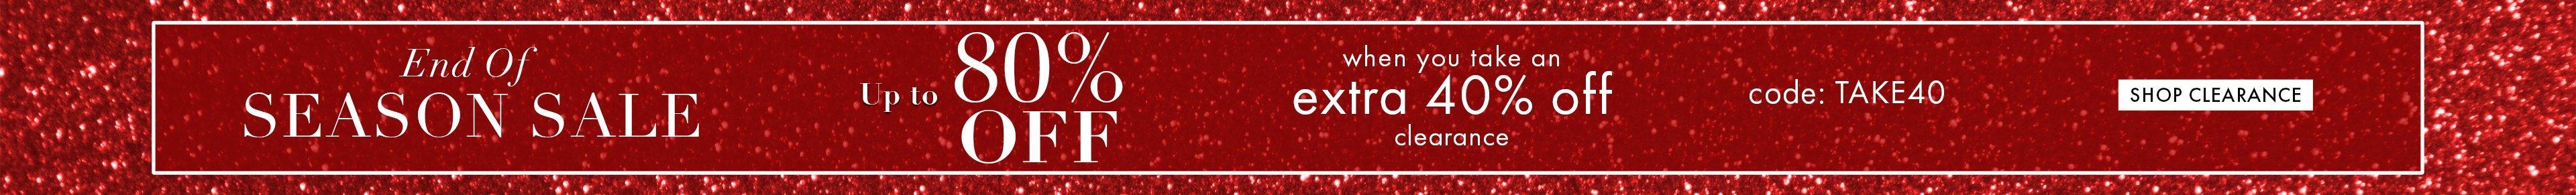 white text on a red sparkling background: end of season sale. up to 80% off when you take an extra 40% off clearance. code: take40